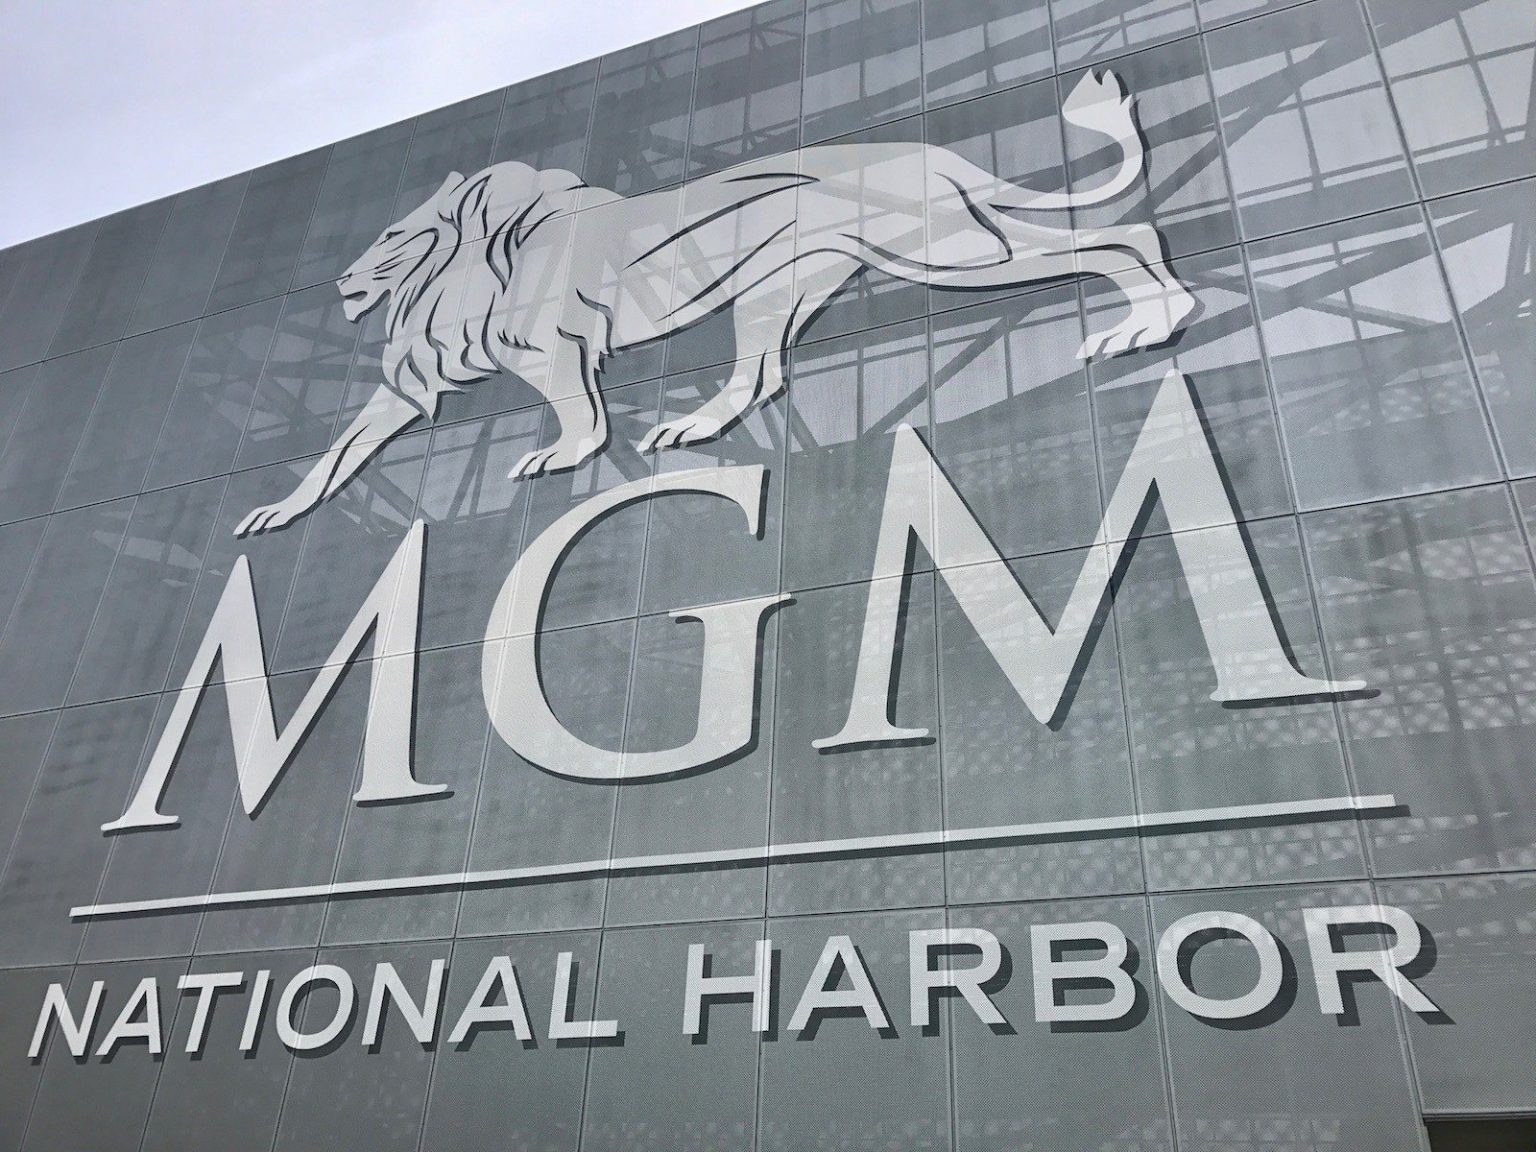 who built mgm casino national harbor